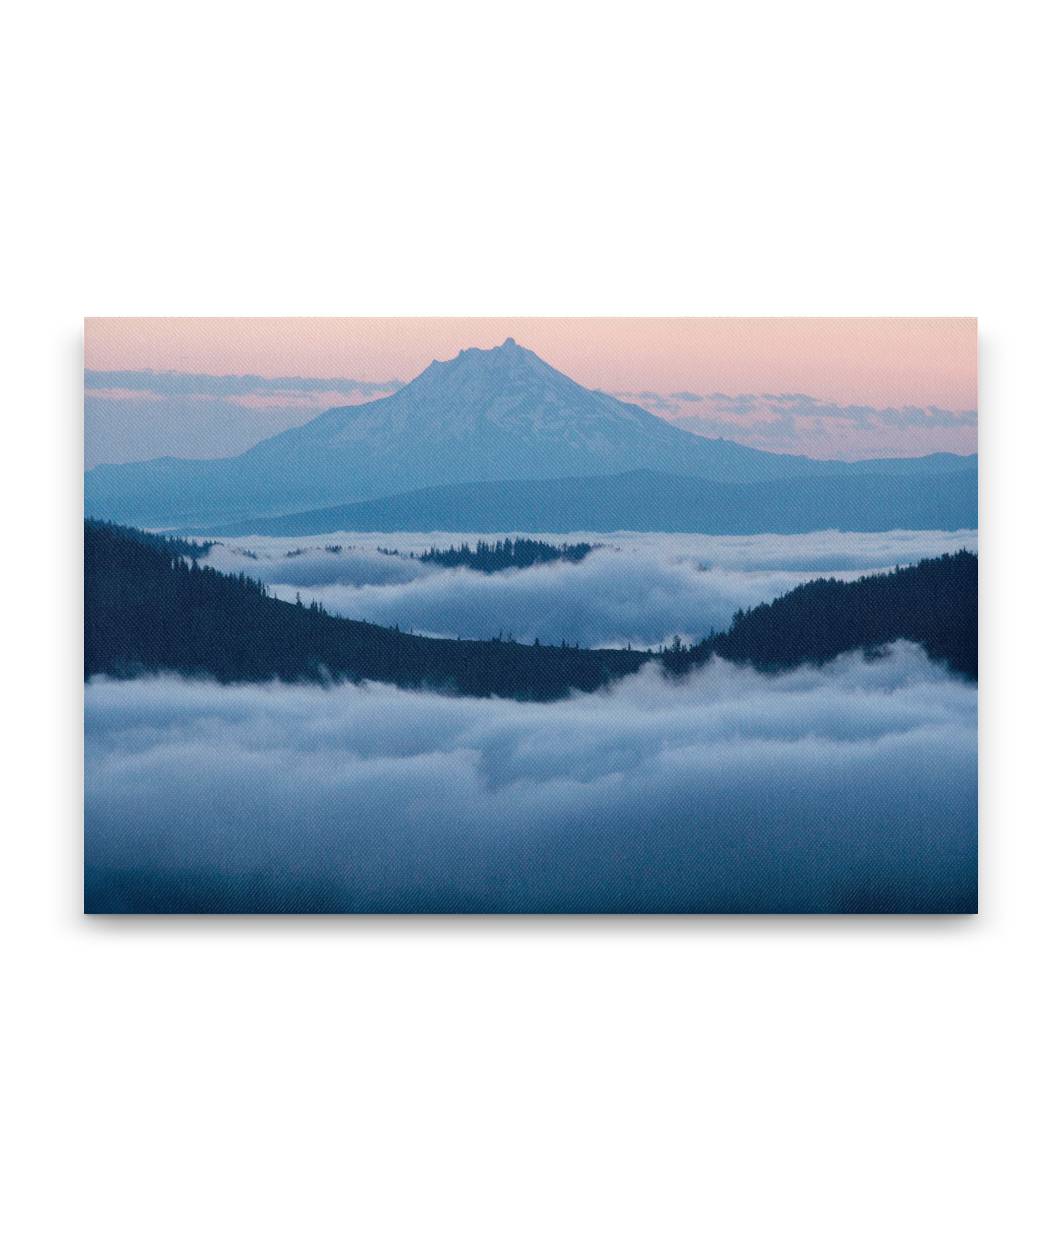 Mount Jefferson and Marine Layer at Sunrise, Willamette National Forest, Oregon